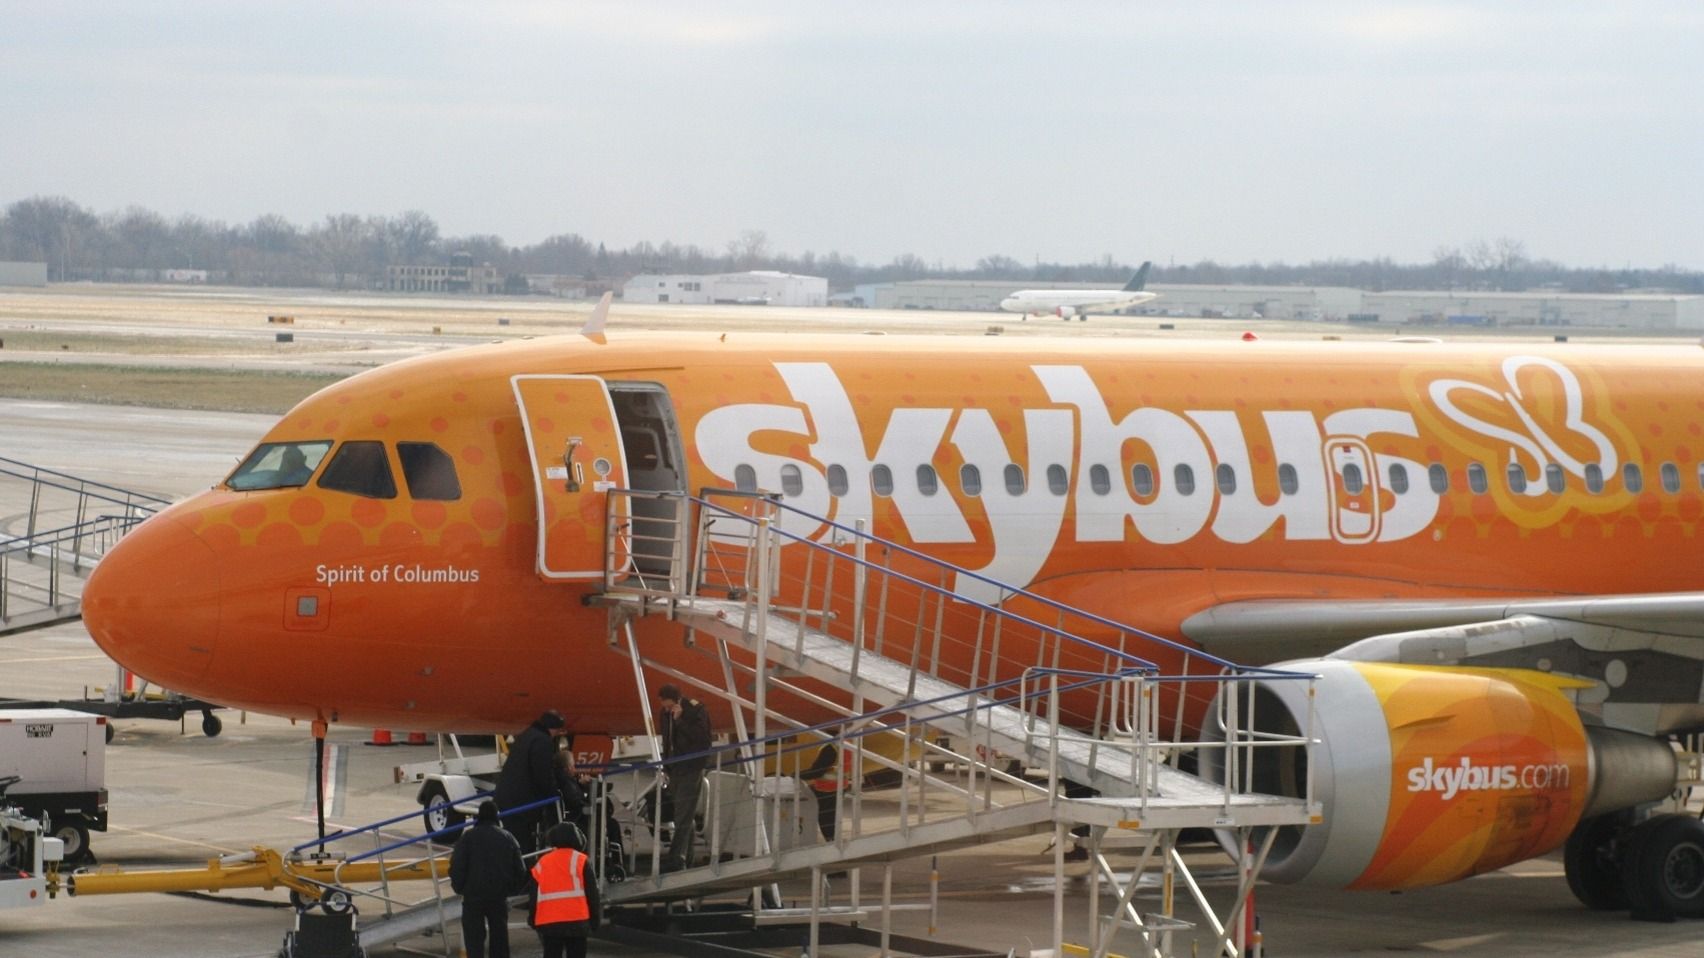 The Skybus aircraft 